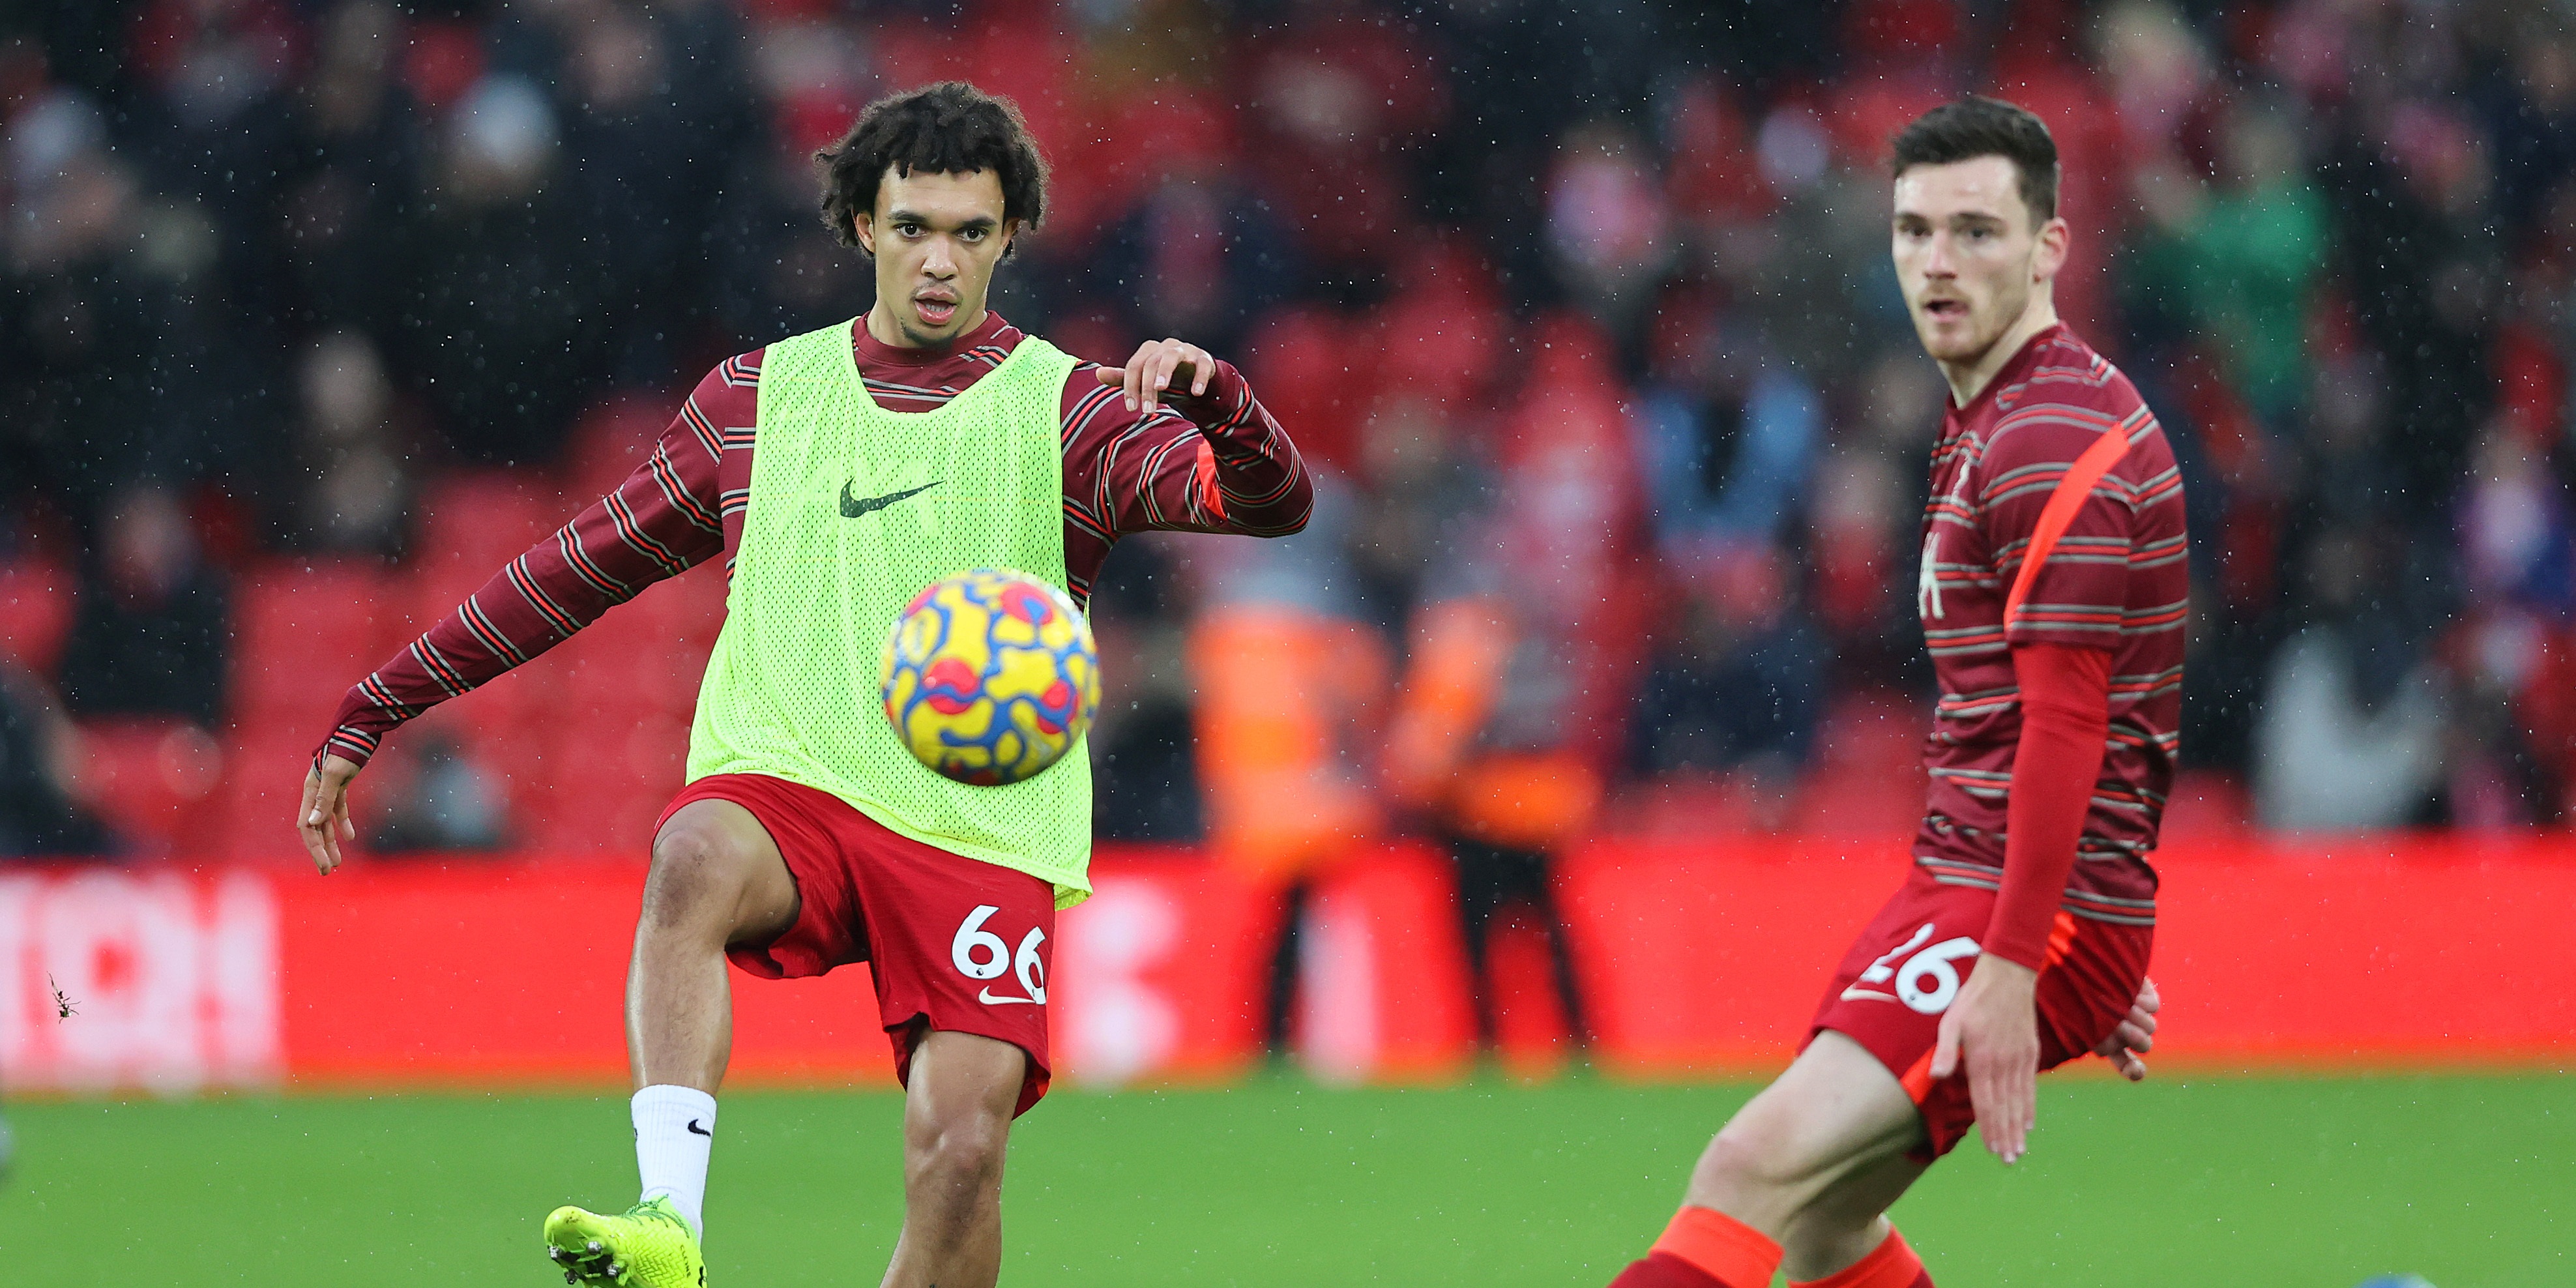 ‘Considering how many he misses’ – Trent calls out Robertson for not repaying match favour